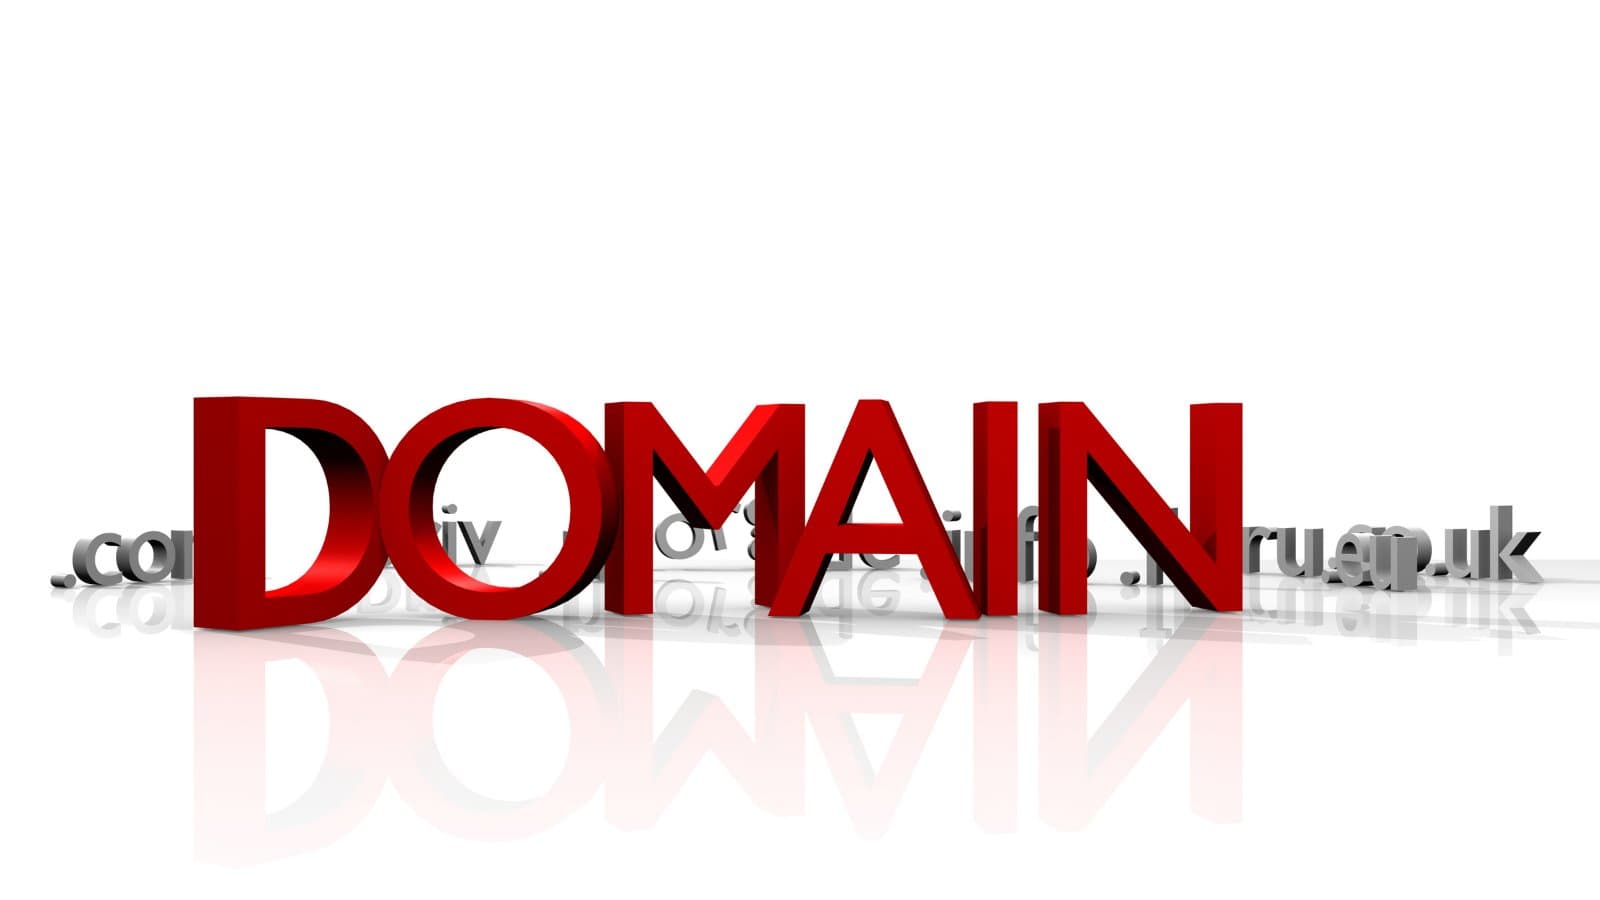 How to use a domain?